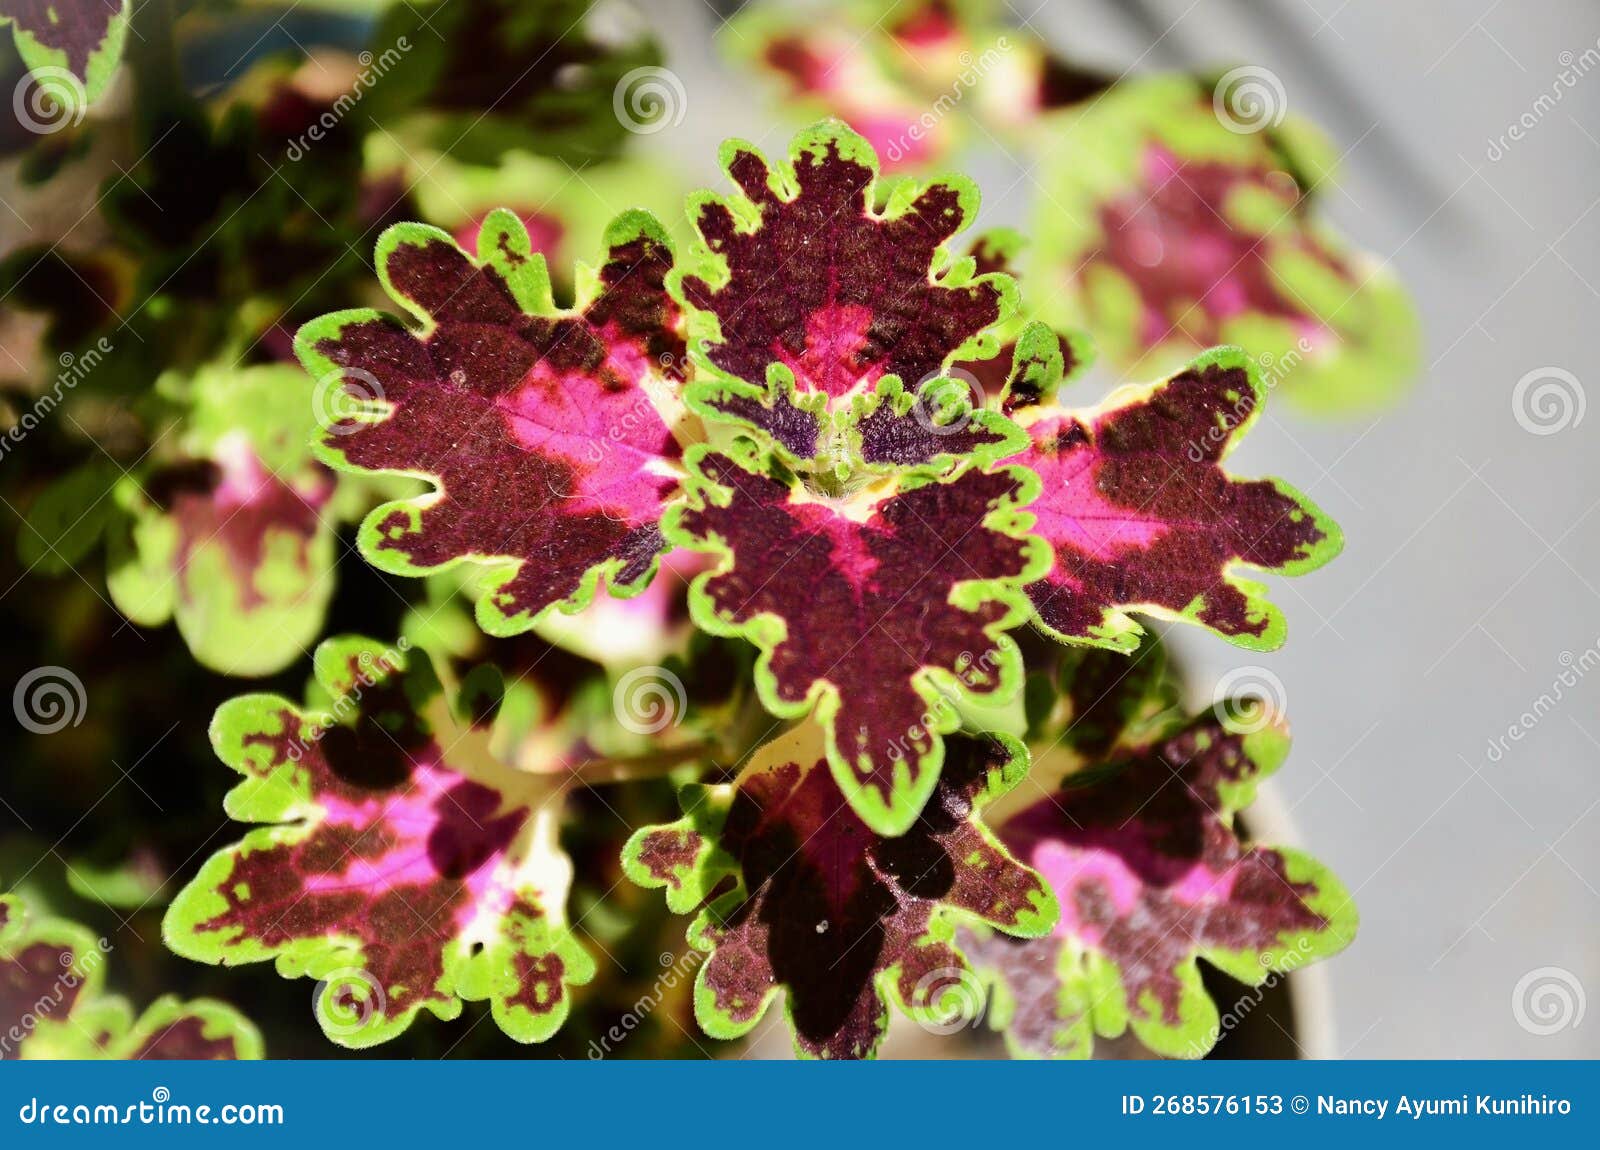 foliage of a curly green, dark red, pink and white coleus hybrida in the garden